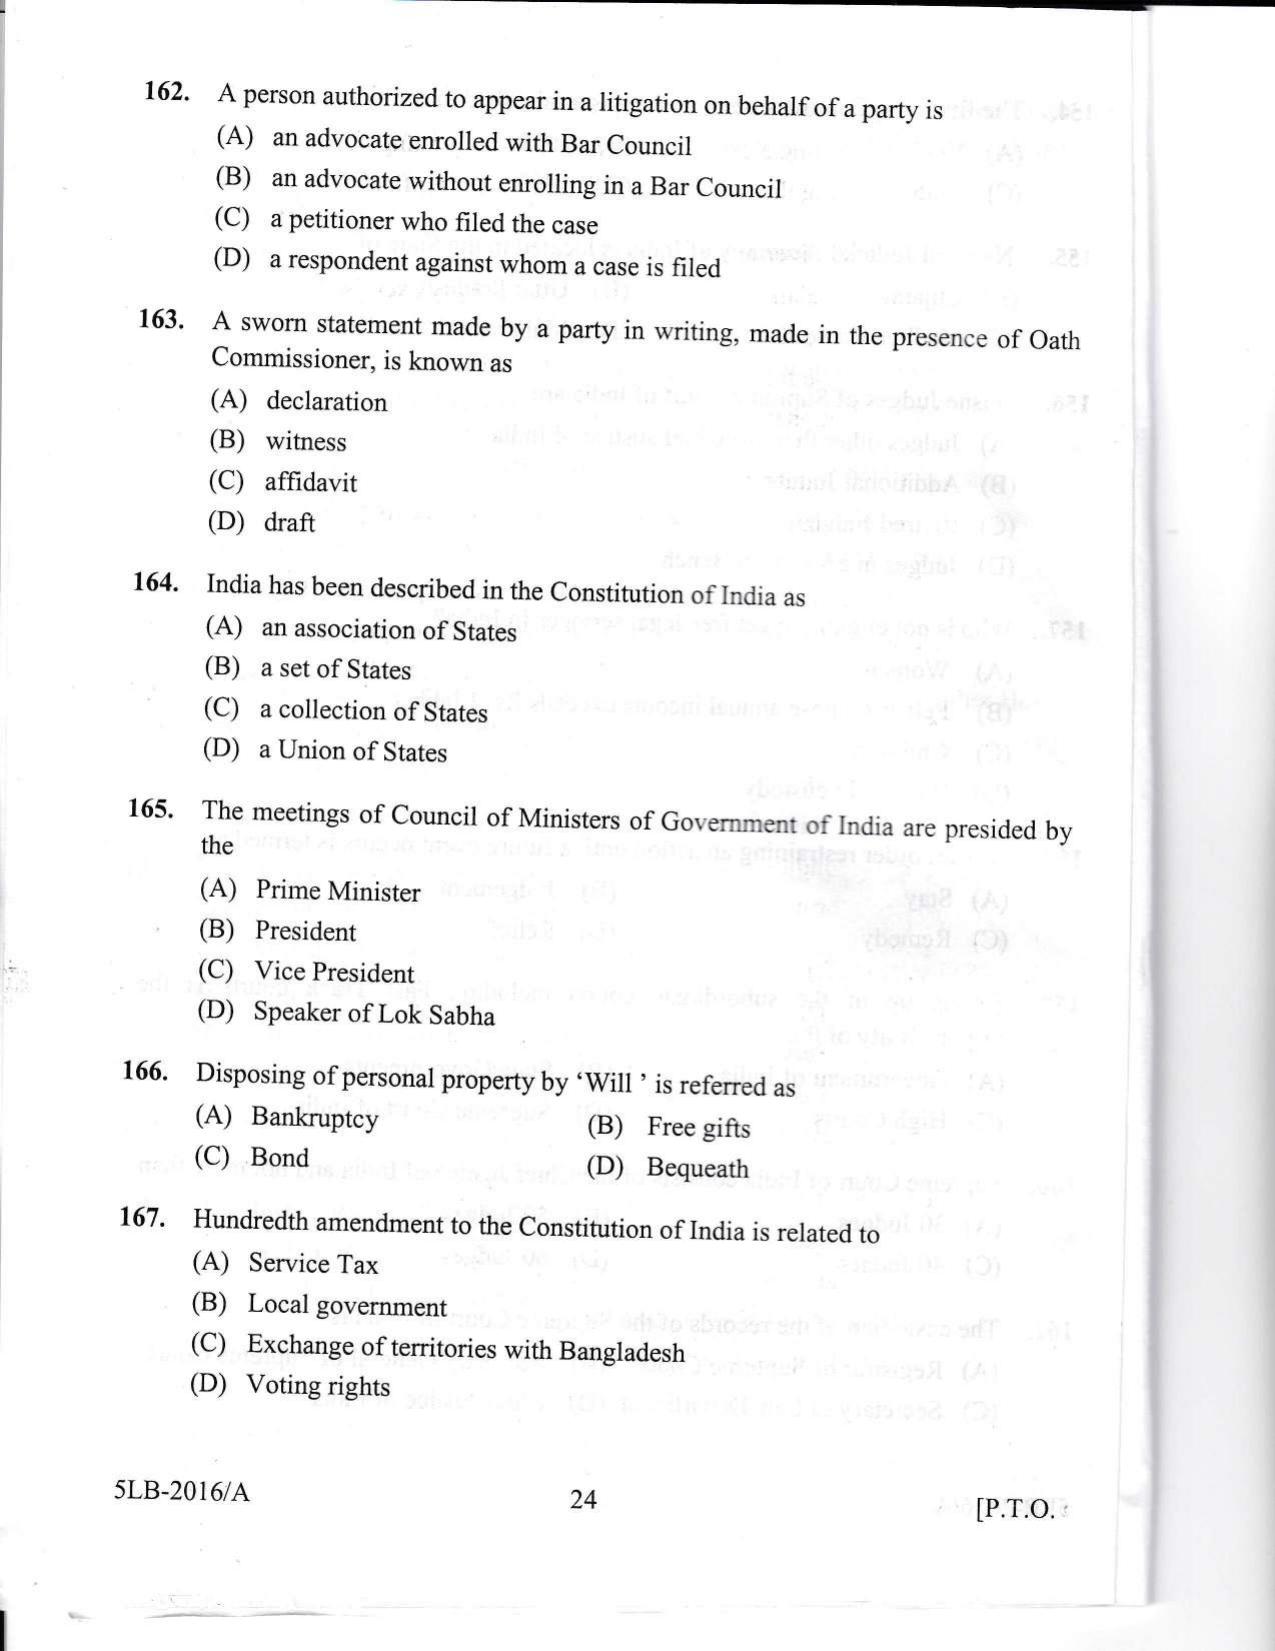 KLEE 5 Year LLB Exam 2016 Question Paper - Page 24